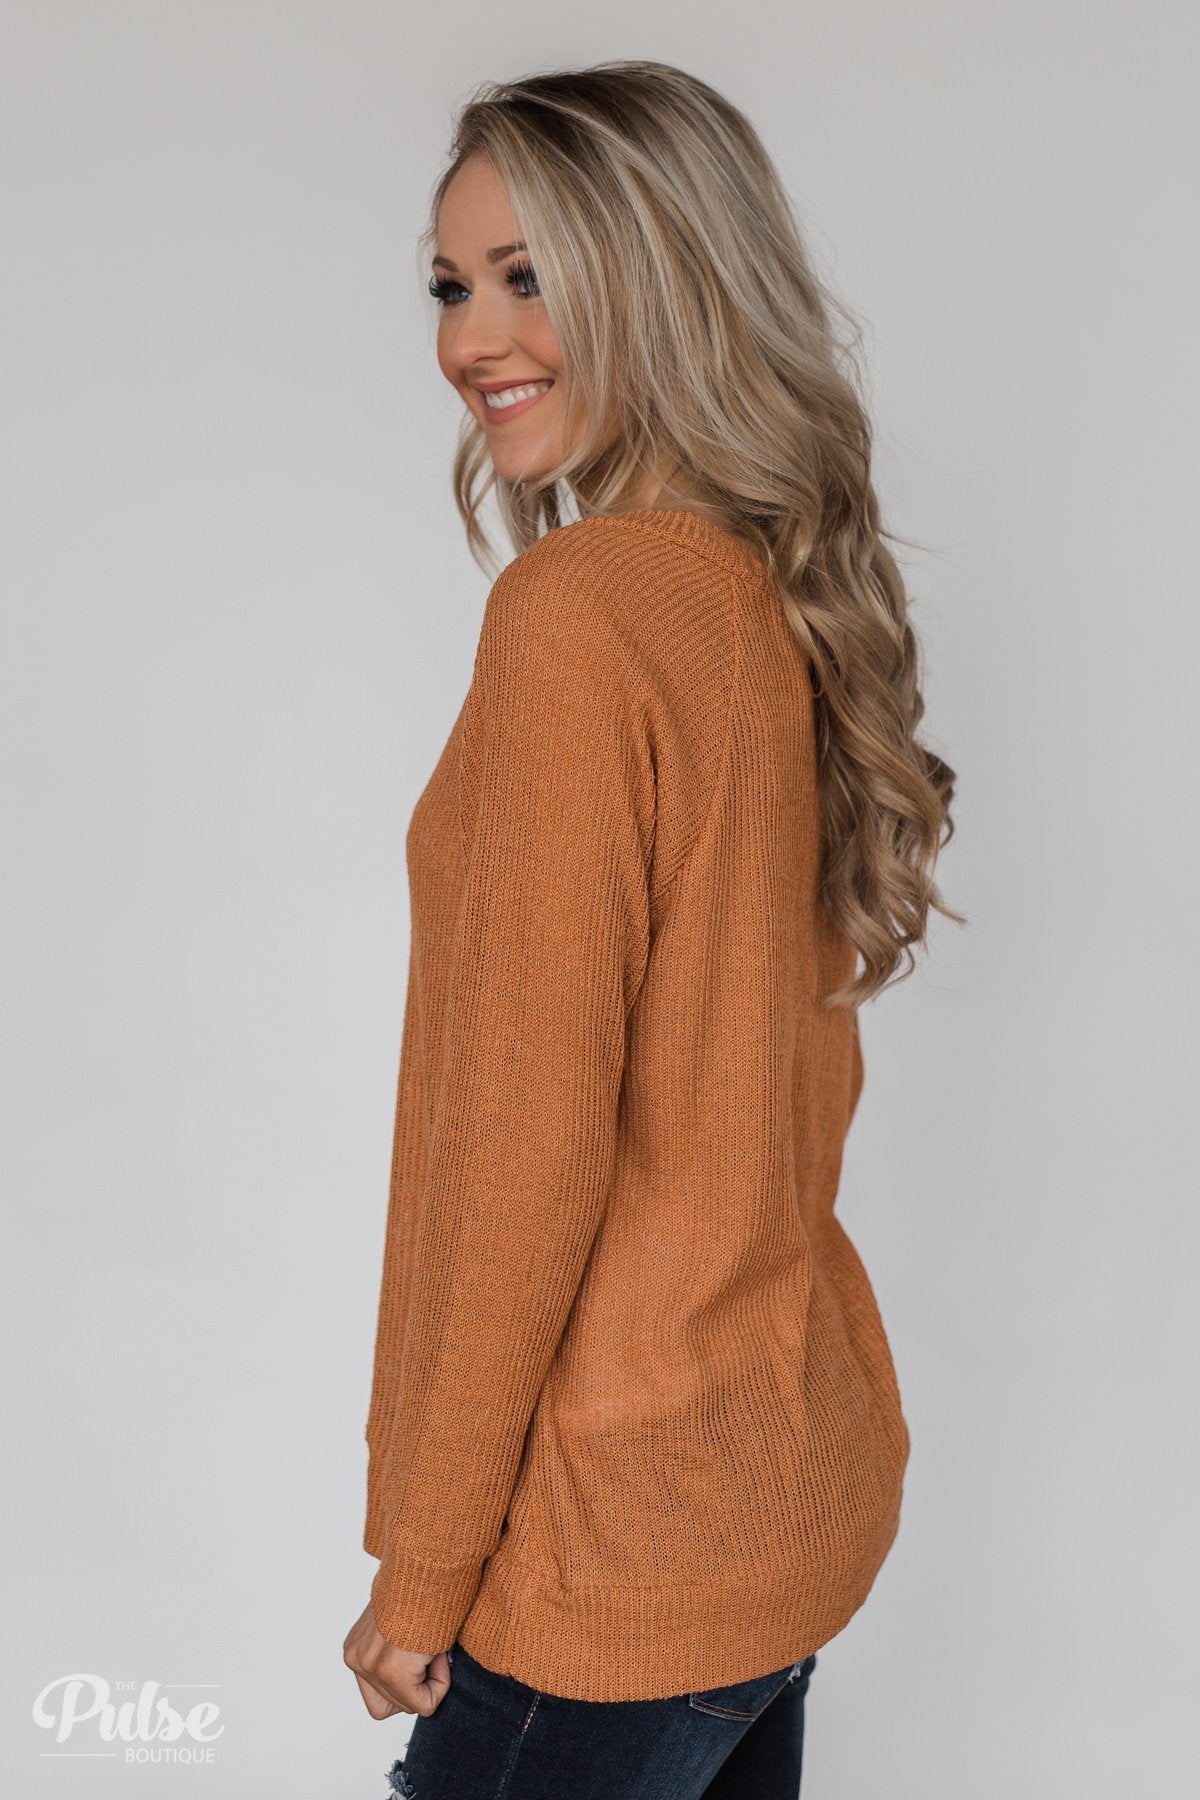 Two Sides of You Knitted Cardigan Top- Light Orange